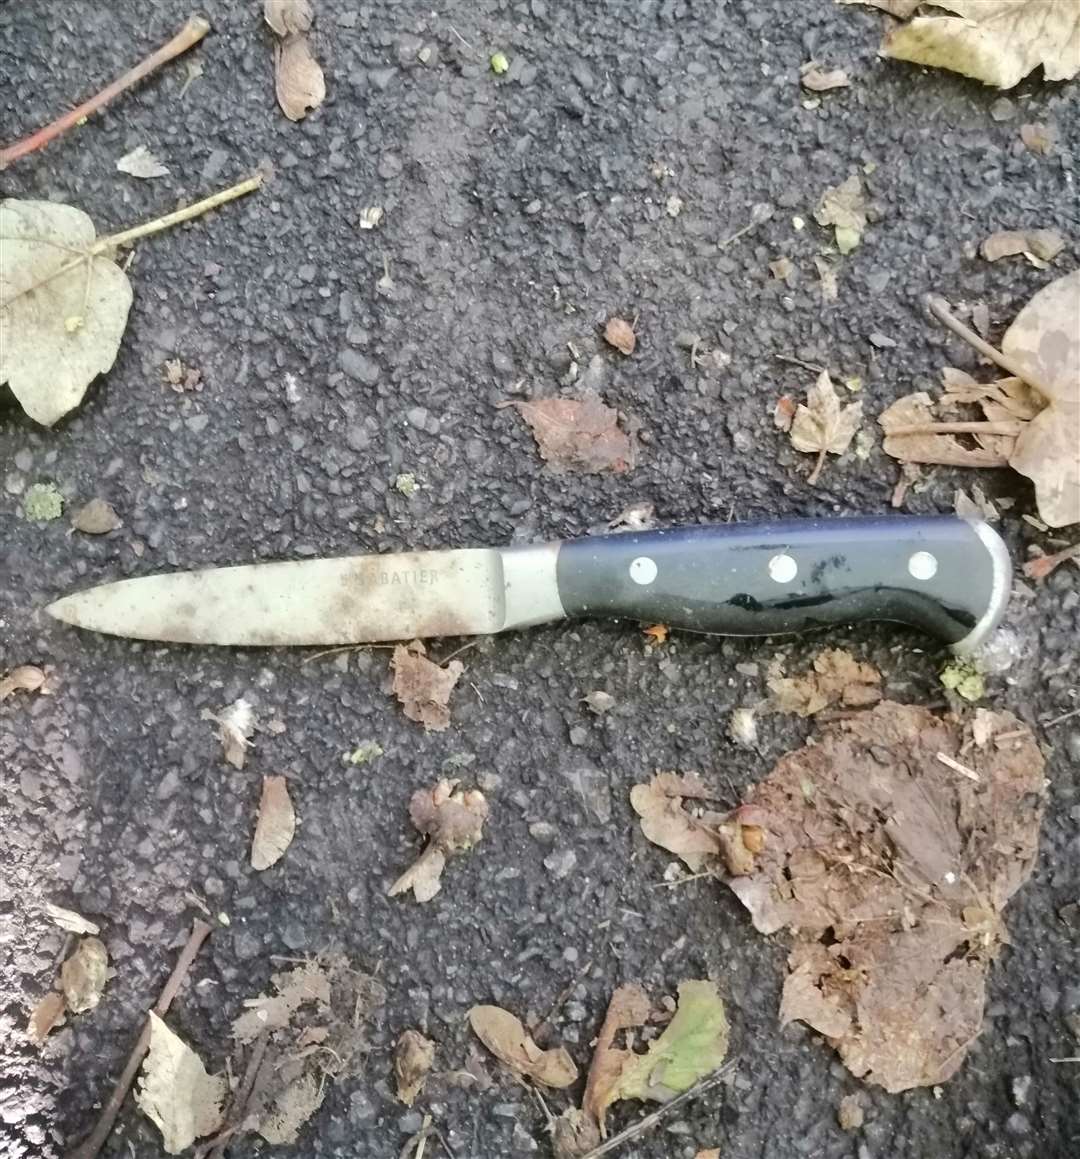 The knife found by the high level bridge in Maidstone